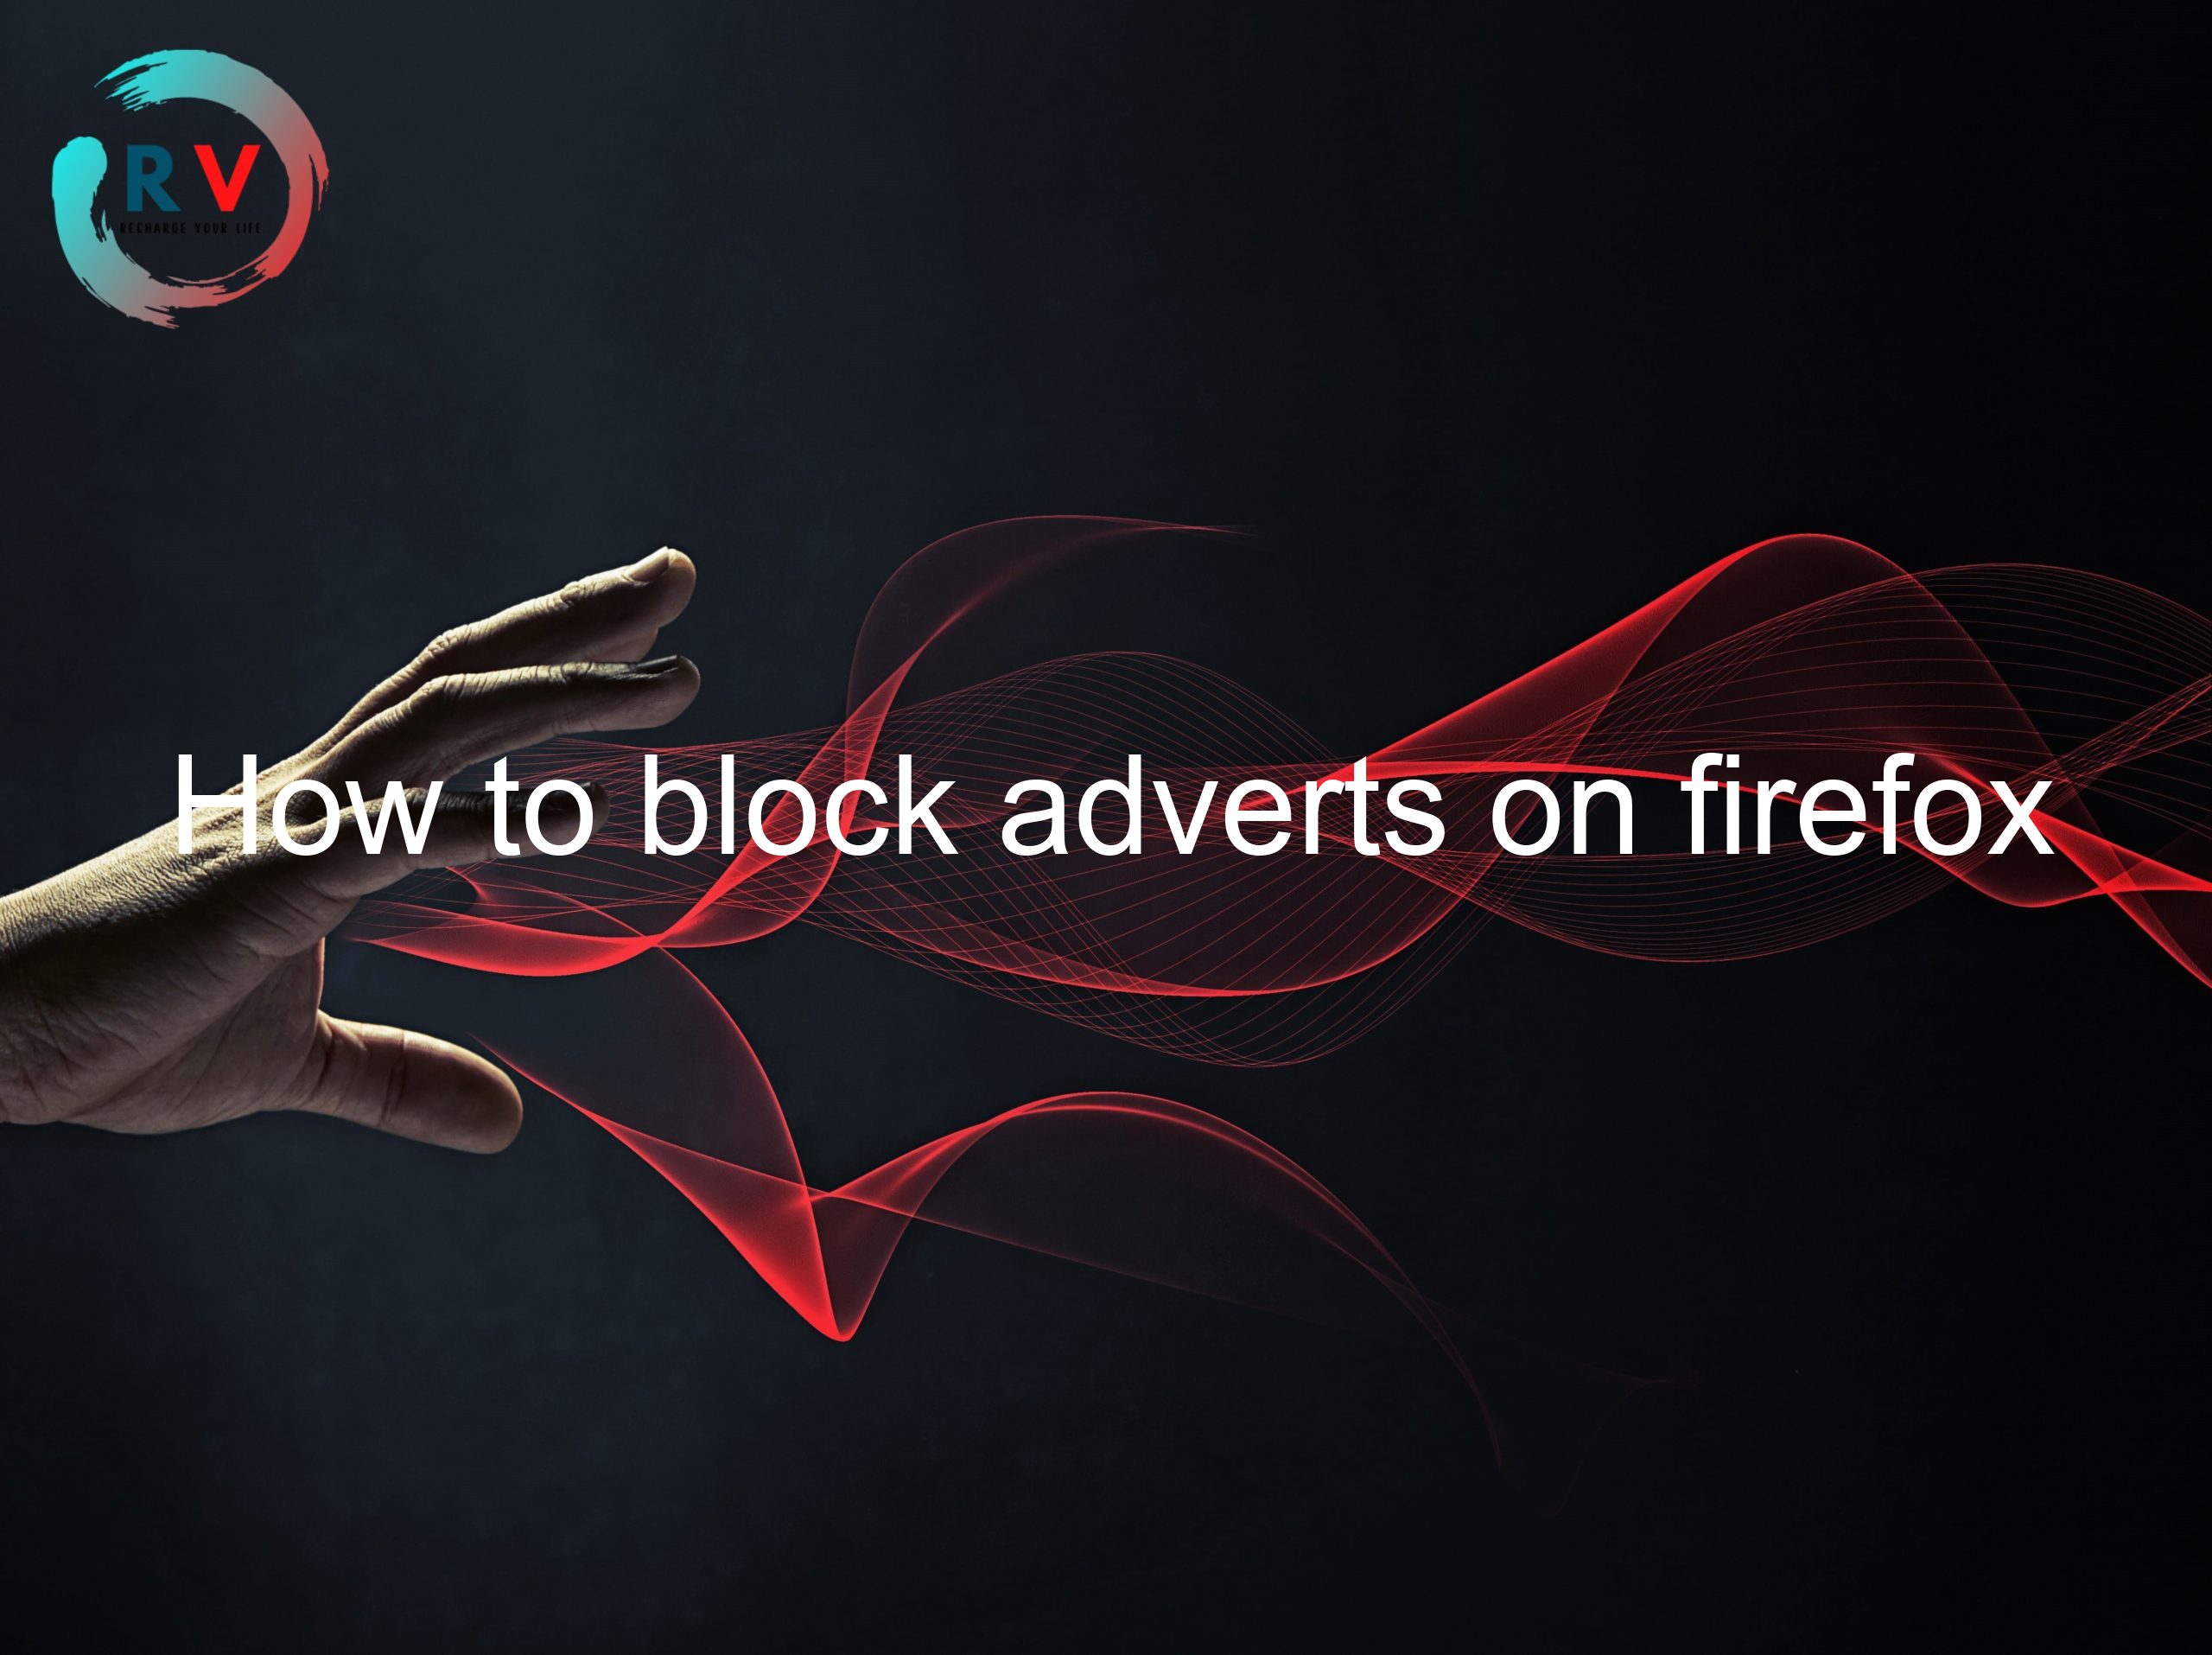 How to block adverts on firefox